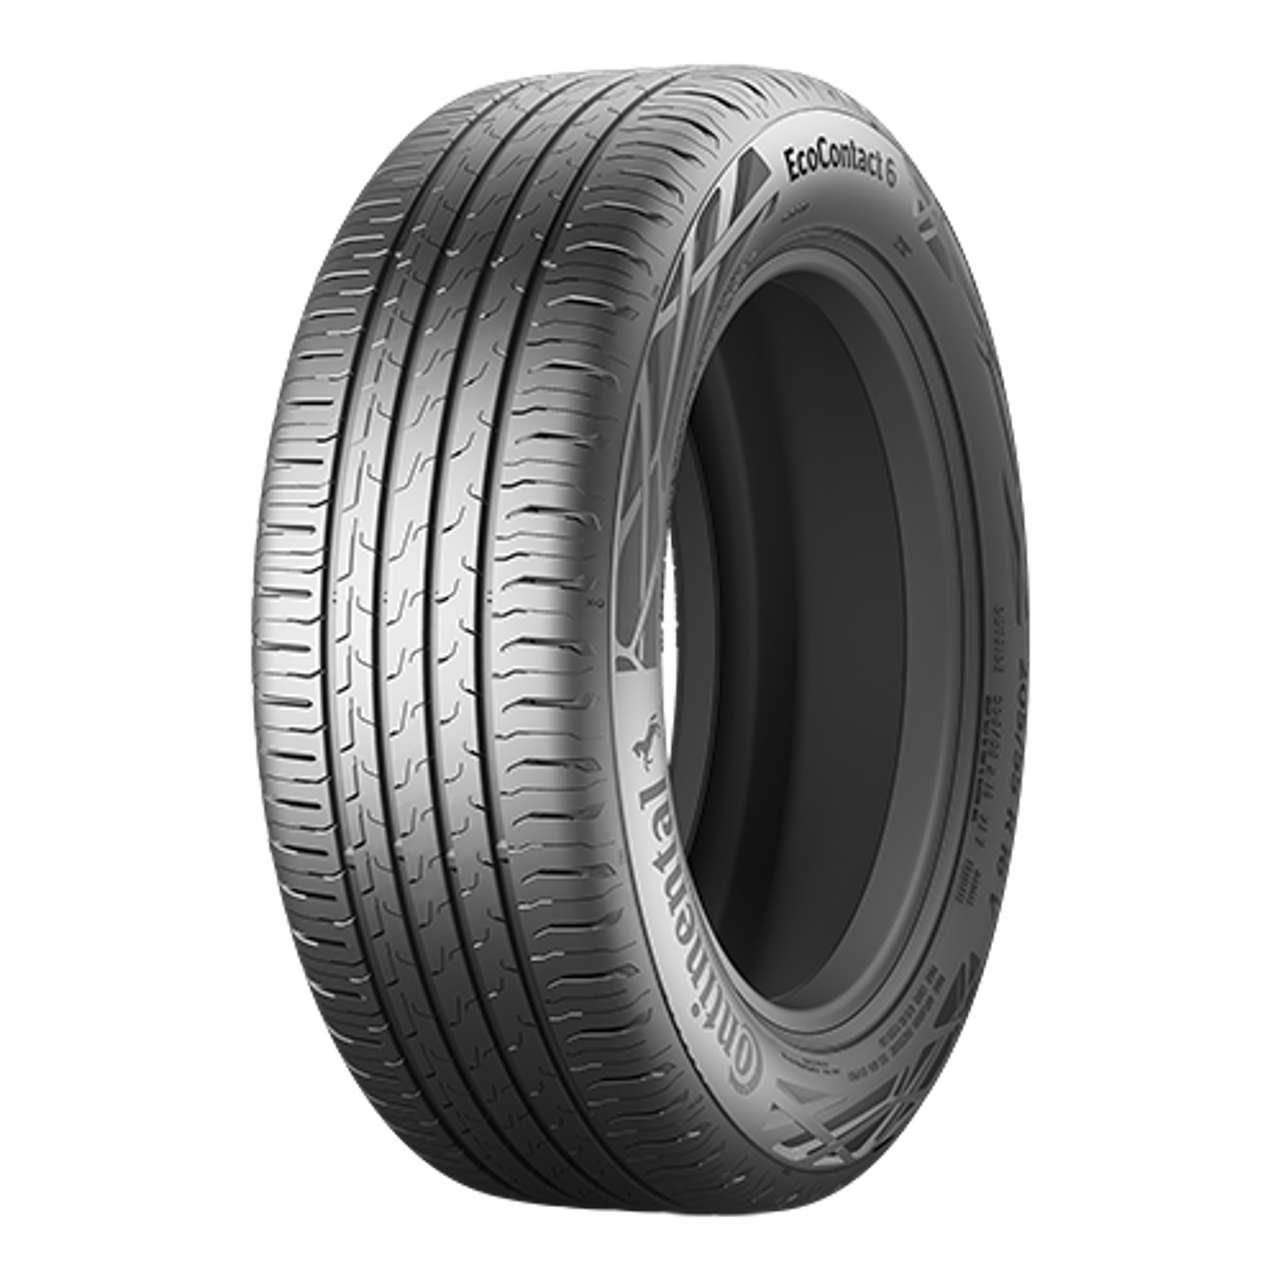 CONTINENTAL ECOCONTACT 6Q (EVc) 235/45R19 99V FR BSW